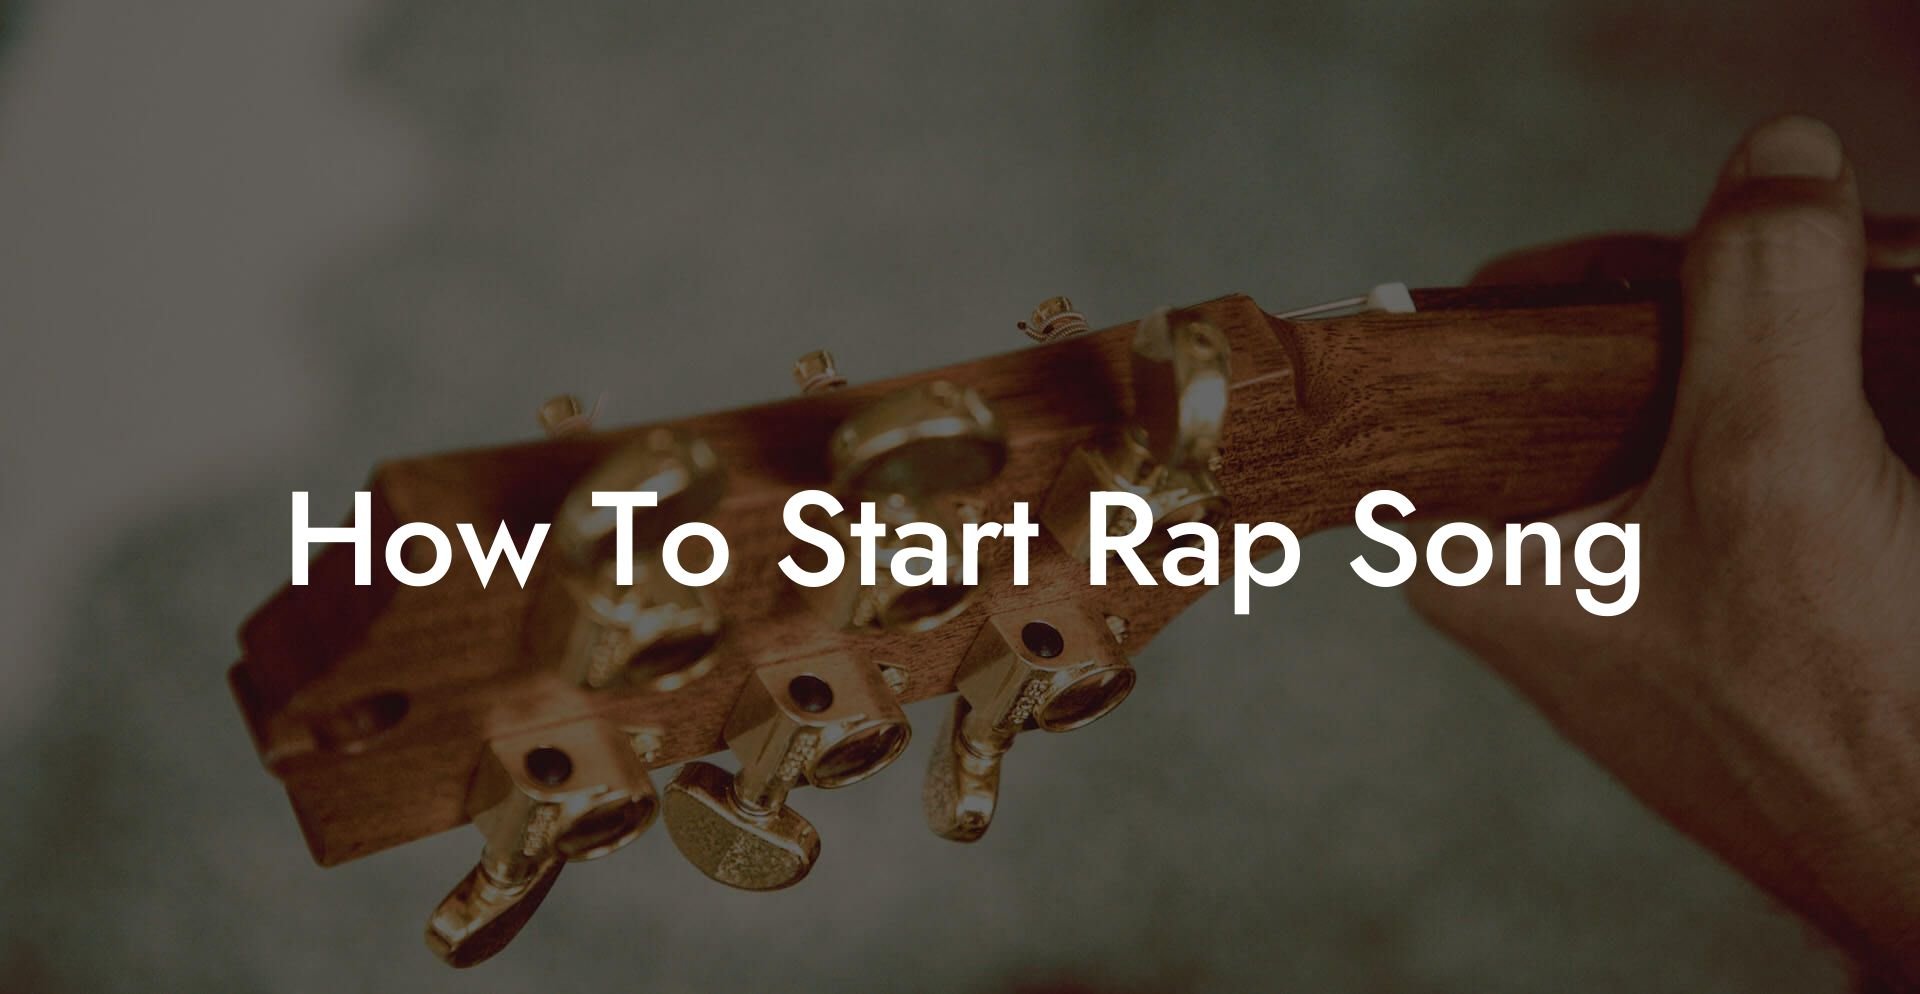 how to start rap song lyric assistant